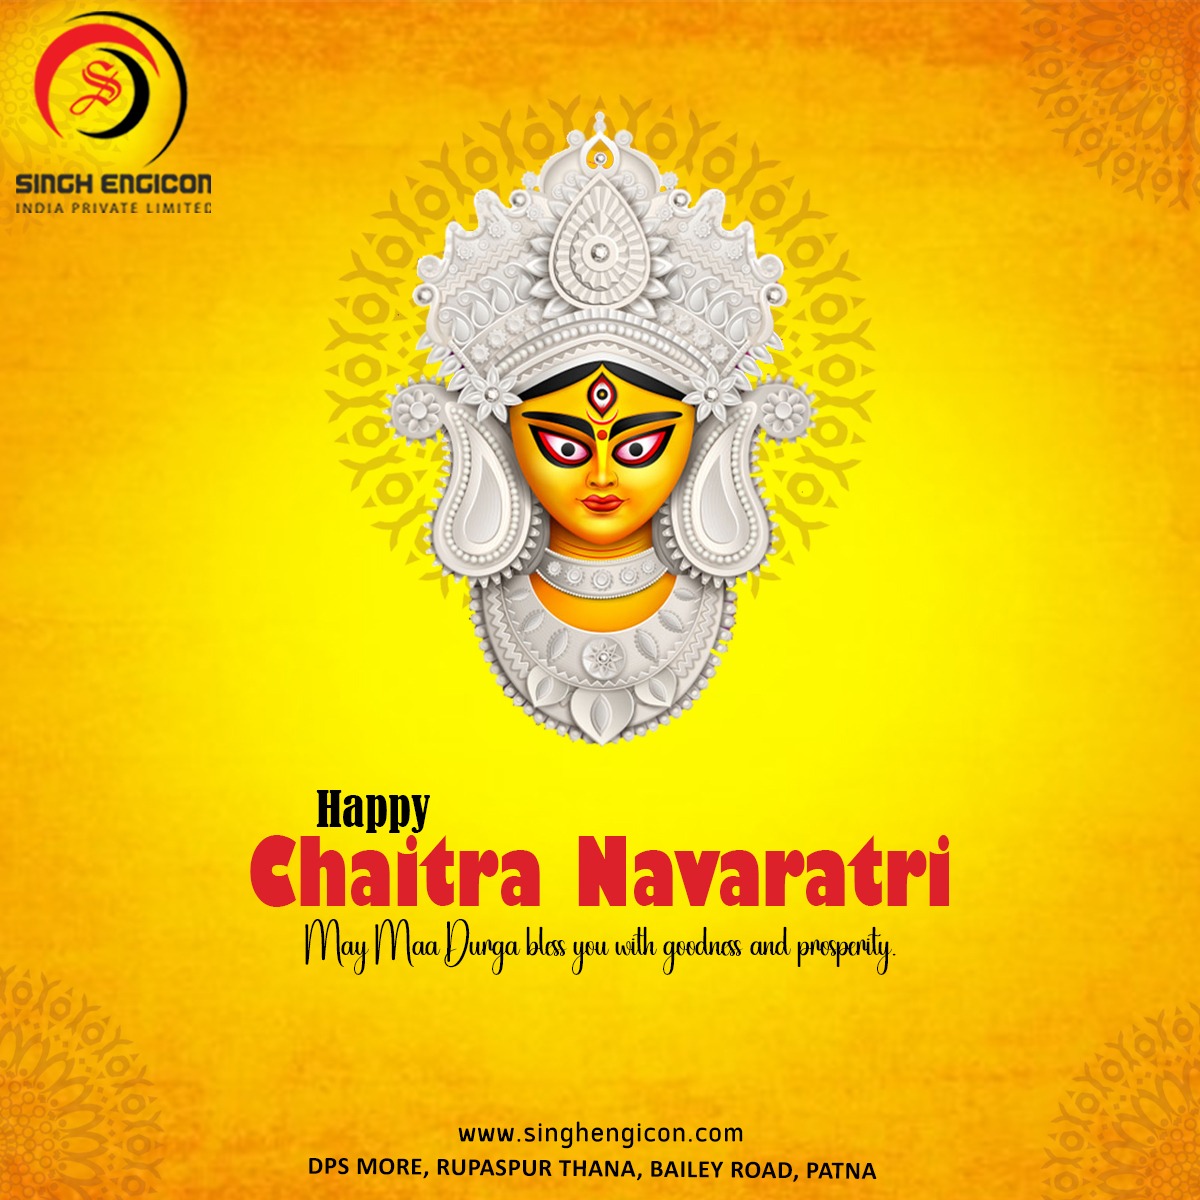 Wishing you a prosperous Chaitra Navratri filled with the blessings of the divine. 
Let's welcome new homes and new opportunities together.  

#Navratri #HappyNavratri #ChaitraNavratri #NavratriCelebrations #DivineBlessings #चैत्र_नवरात्रि #singhengicon #Patna #Bihar